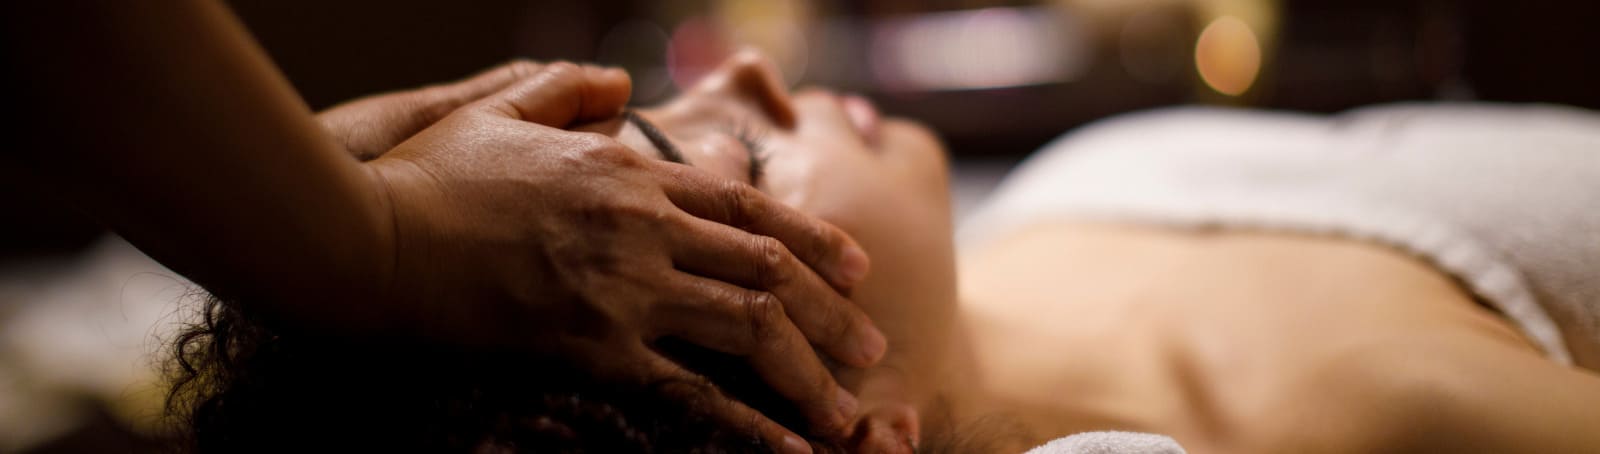 All the Benefits of Massage Workshop for Couples at Nuad Thai School